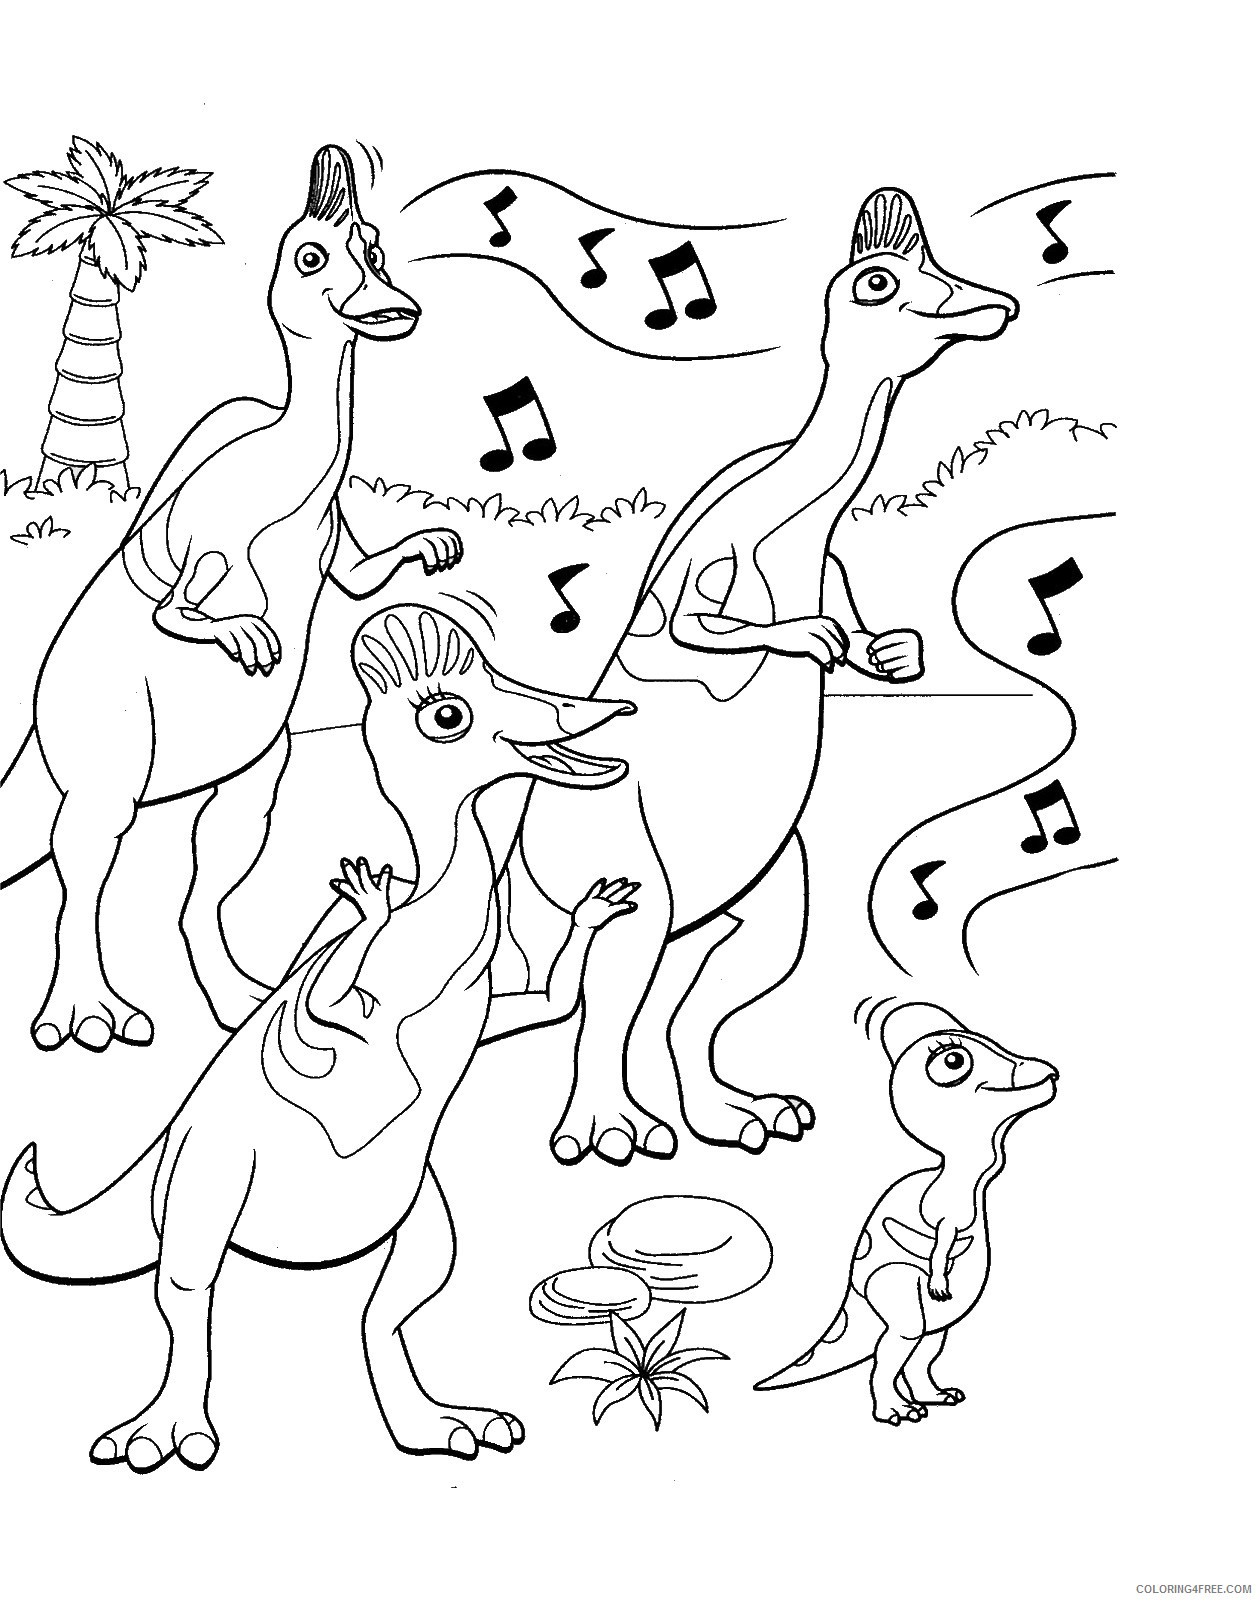 Dinosaur Train Coloring Pages Cartoons dino_train_cl_15 Printable 2020 2236 Coloring4free